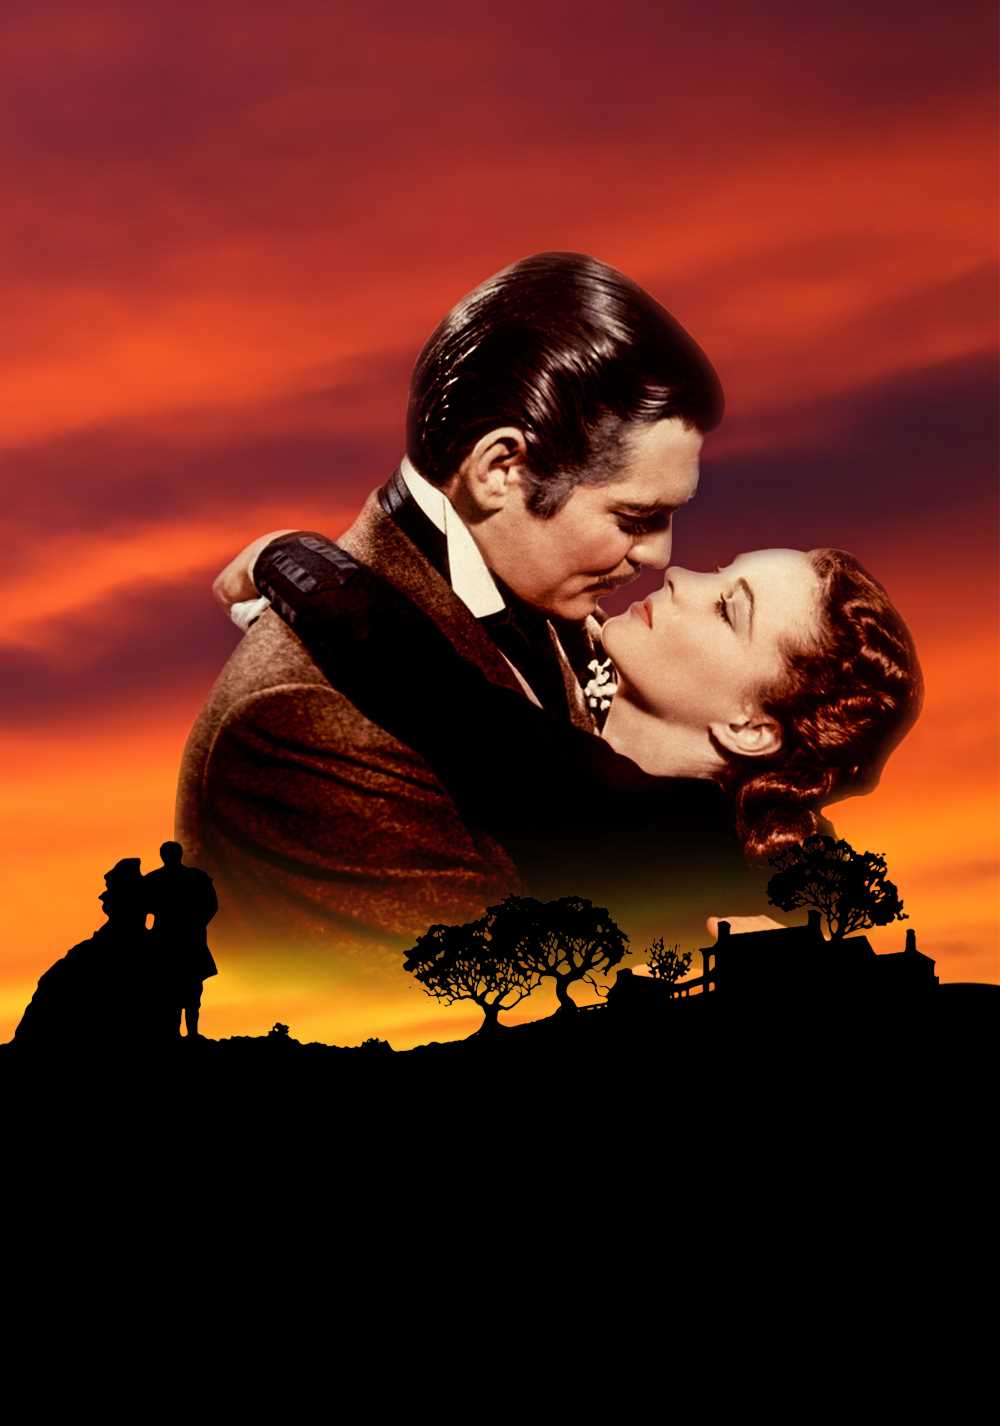 Gone with the wind questions and answers